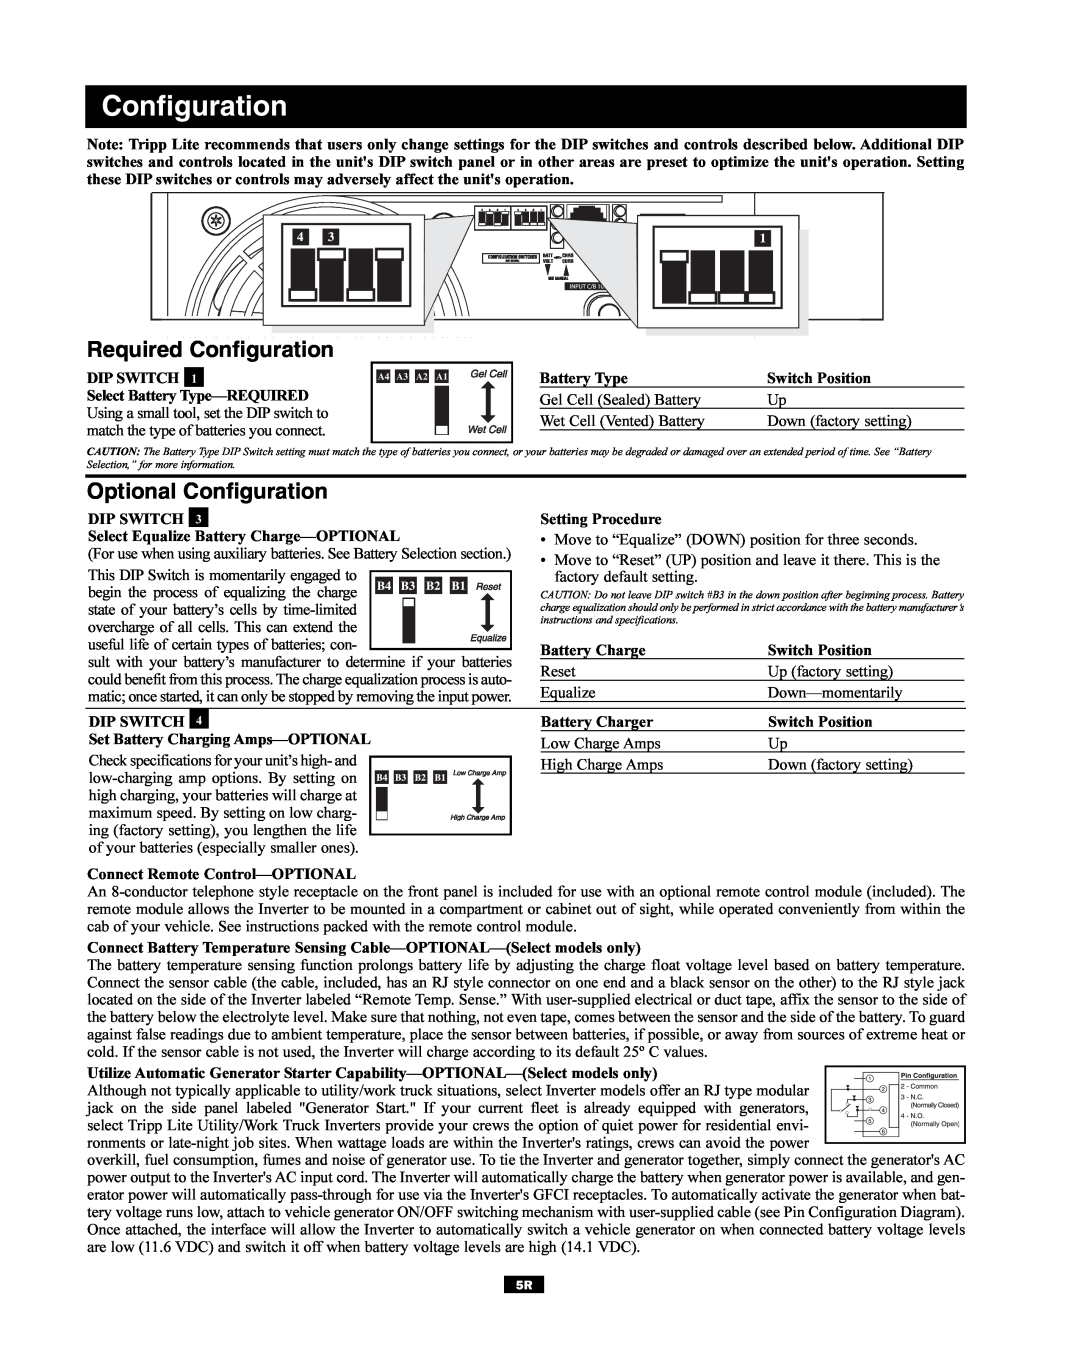 Tripp Lite UT Series owner manual Required Configuration, Optional Configuration 